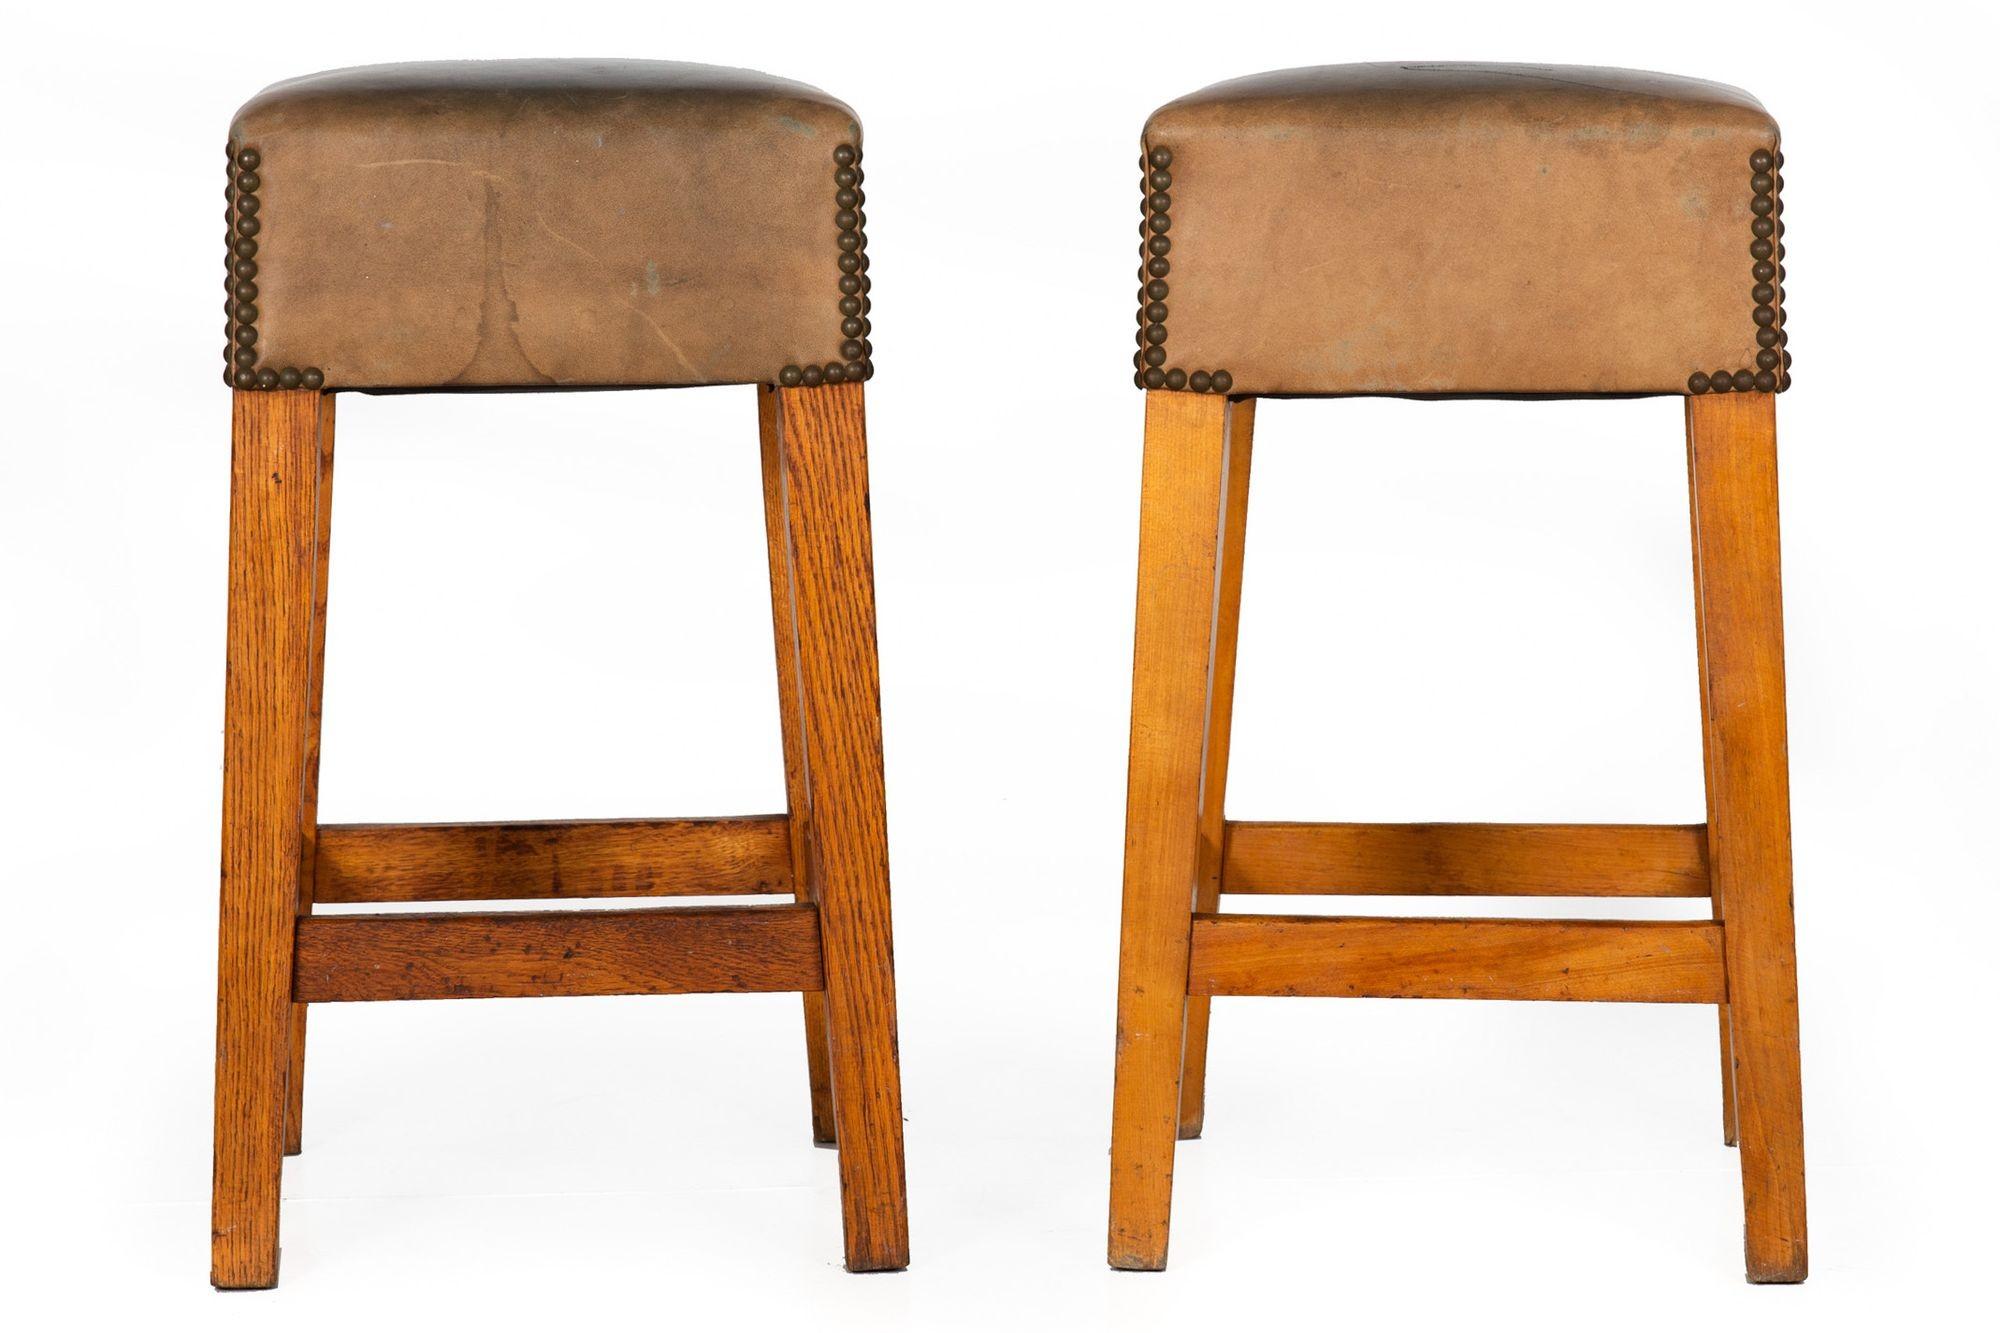 VINTAGE PAIR OF OAK AND CHERRY WORN LEATHER BARSTOOLS
Circa 2nd quarter of the 20th century  counter height
Item # 305GTP10P 

A fantastic pair of vintage barstools, they retain a very early worn leather surface with brass tacking. One is executed